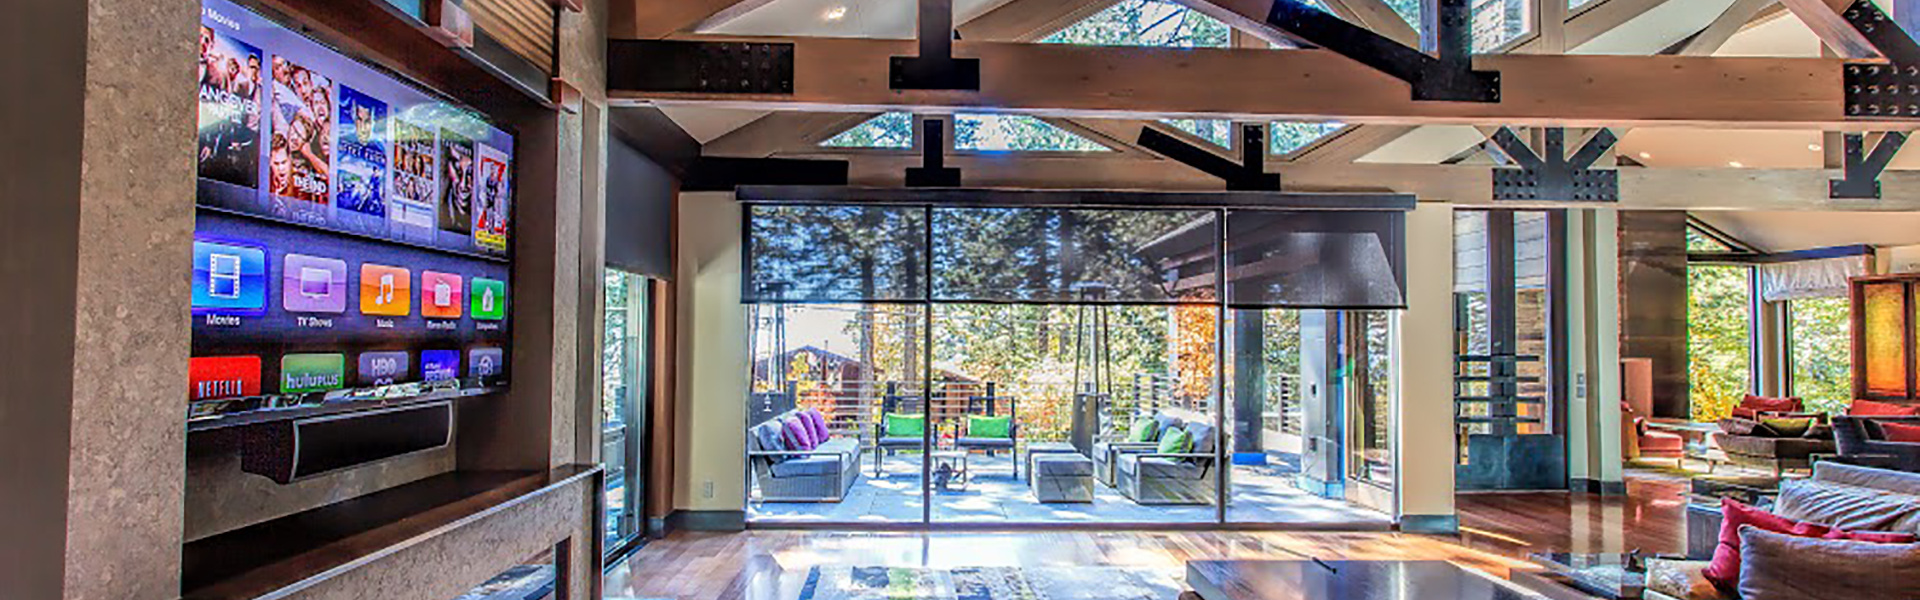 Smart home installation by Sierra Integrated Systems for Truckee